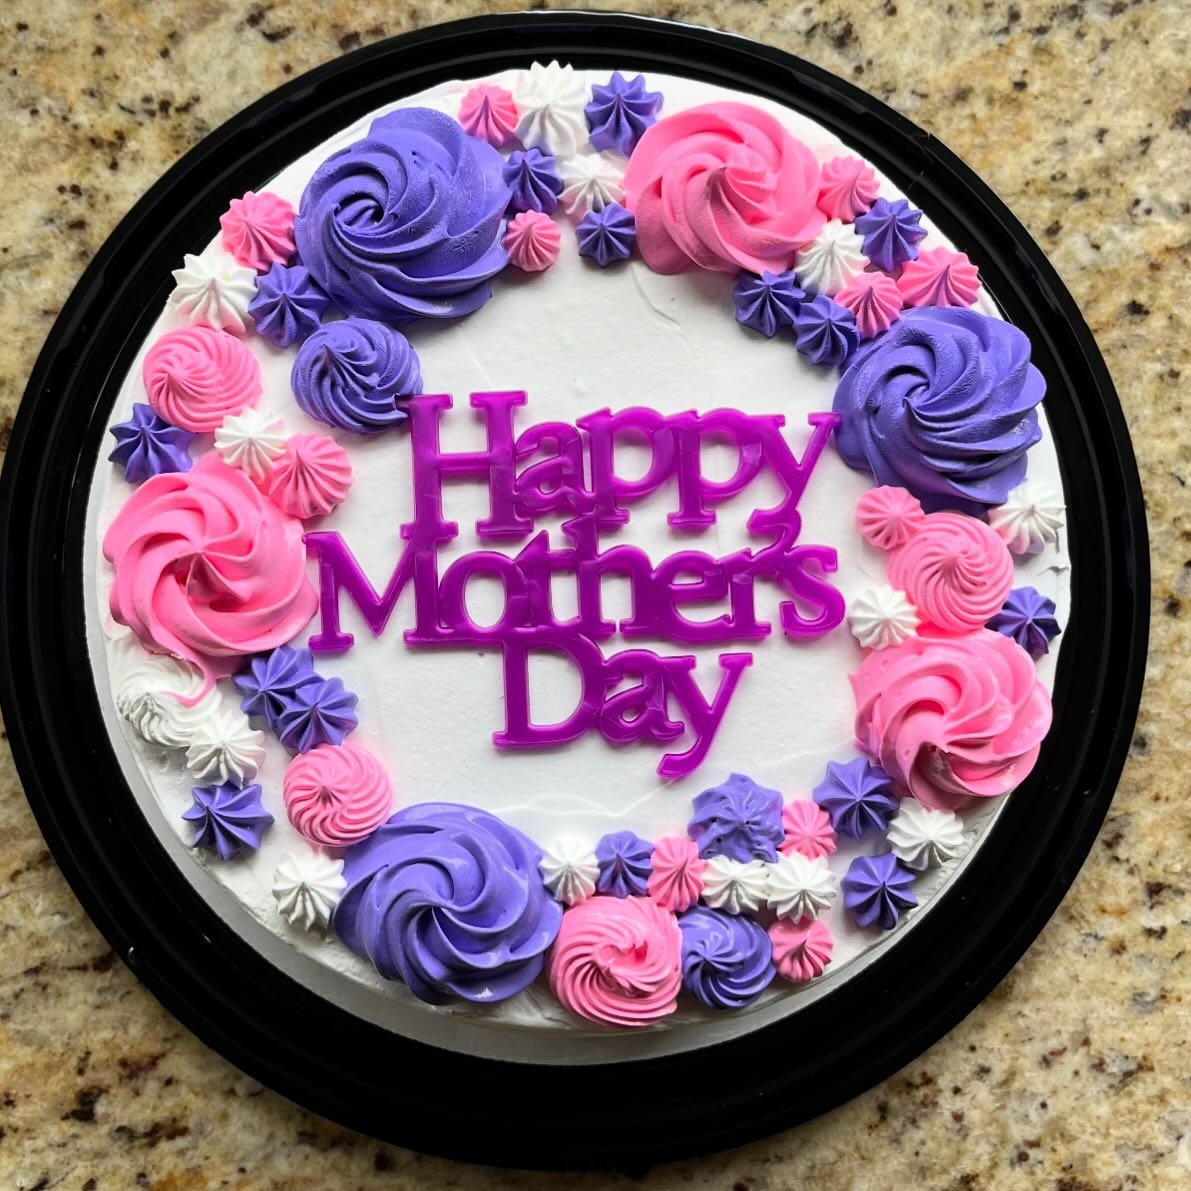 We&rsquo;re stocked up on ICE CREAM CAKES for Mother&rsquo;s Day! They&rsquo;re creamy, delicious, and almost as sweet as Mom!
⠀⠀⠀⠀⠀⠀⠀⠀⠀⠀⠀⠀⠀⠀⠀⠀⠀⠀
Come on by!
🌷Sun: Noon-9pm
🌷Mon-Thur: 1pm-9pm
🌷Fri: 1pm-10pm
🌷Sat: Noon-10pm

⠀⠀⠀⠀⠀⠀⠀⠀⠀⠀⠀⠀⠀⠀⠀⠀⠀⠀ 
⠀⠀